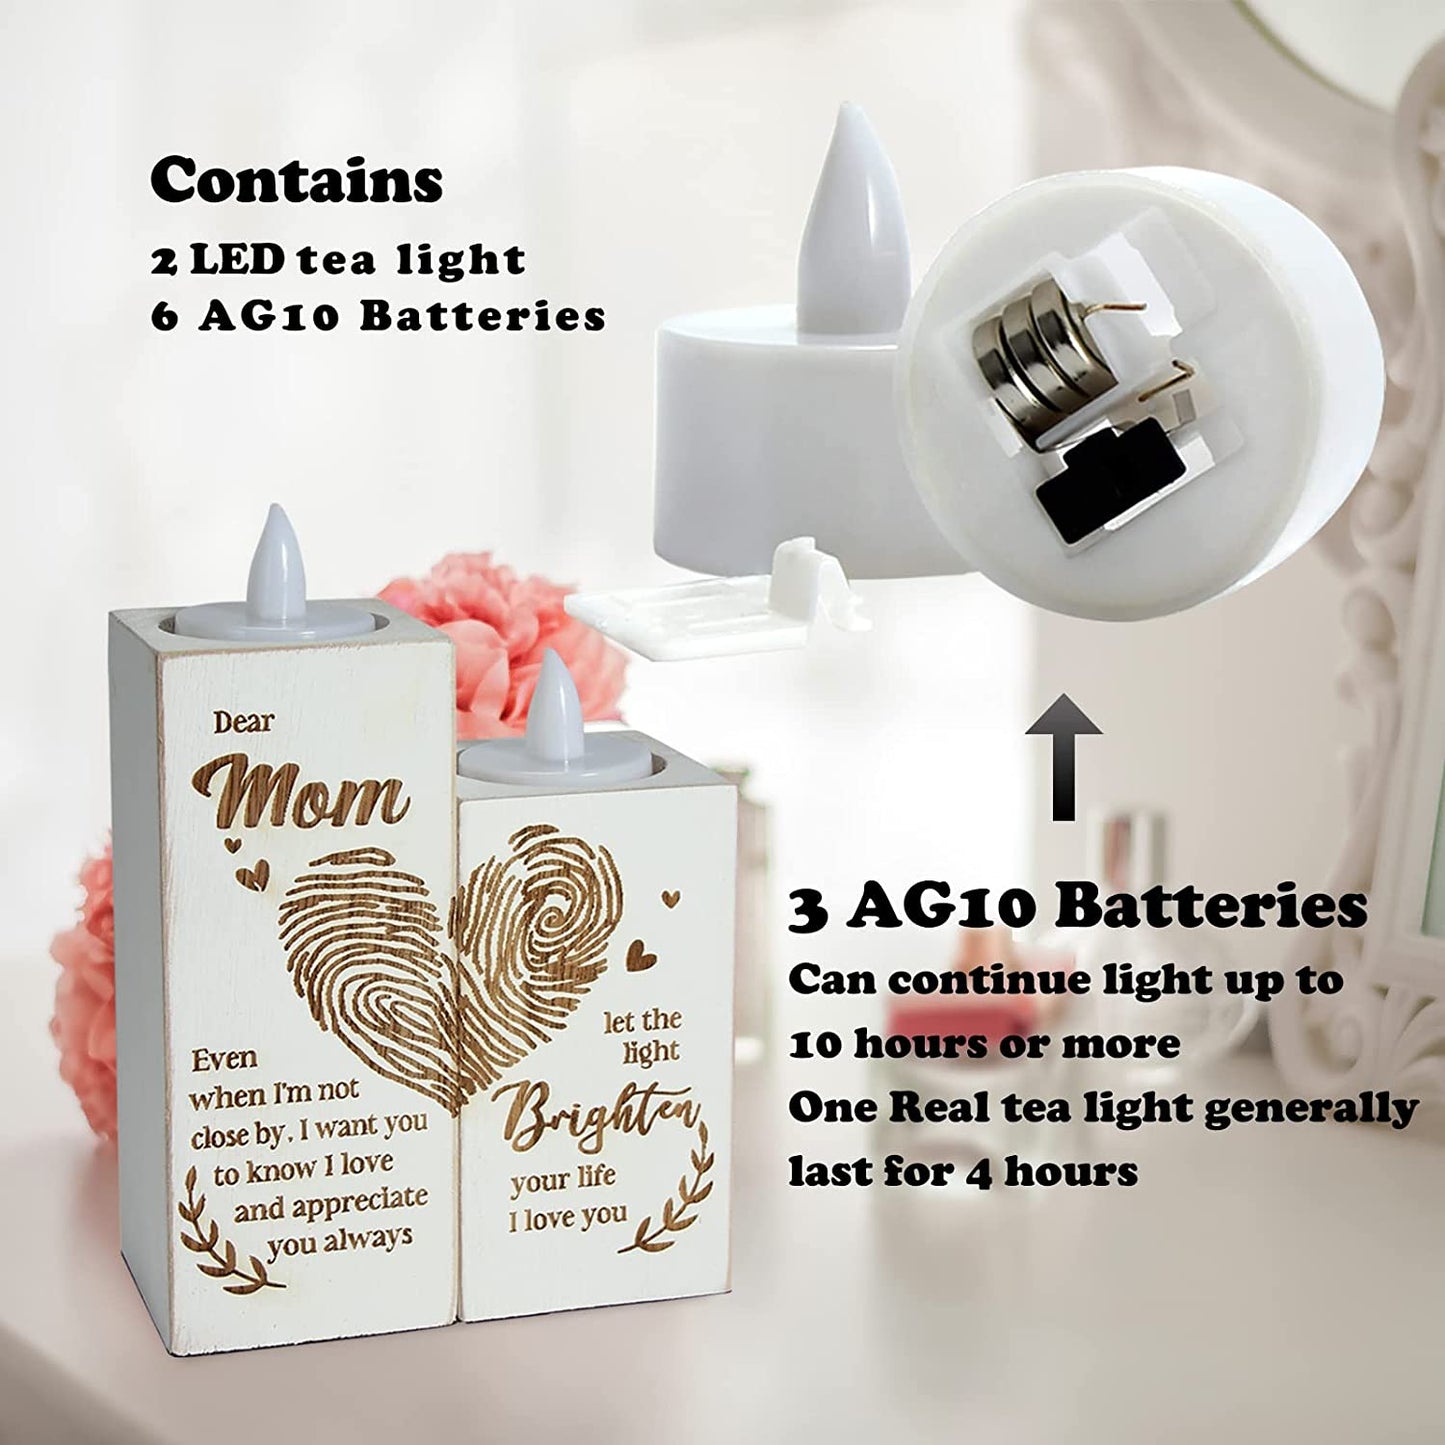 Gifts for Mom from Daughter, Meaningful Gifts for Mom, Rustic Farmhouse Style Tealight Candle Holder, for Mom's Birthday，Mother's Day, Christmas, Valentines Day，Fingerprint Heart Pattern